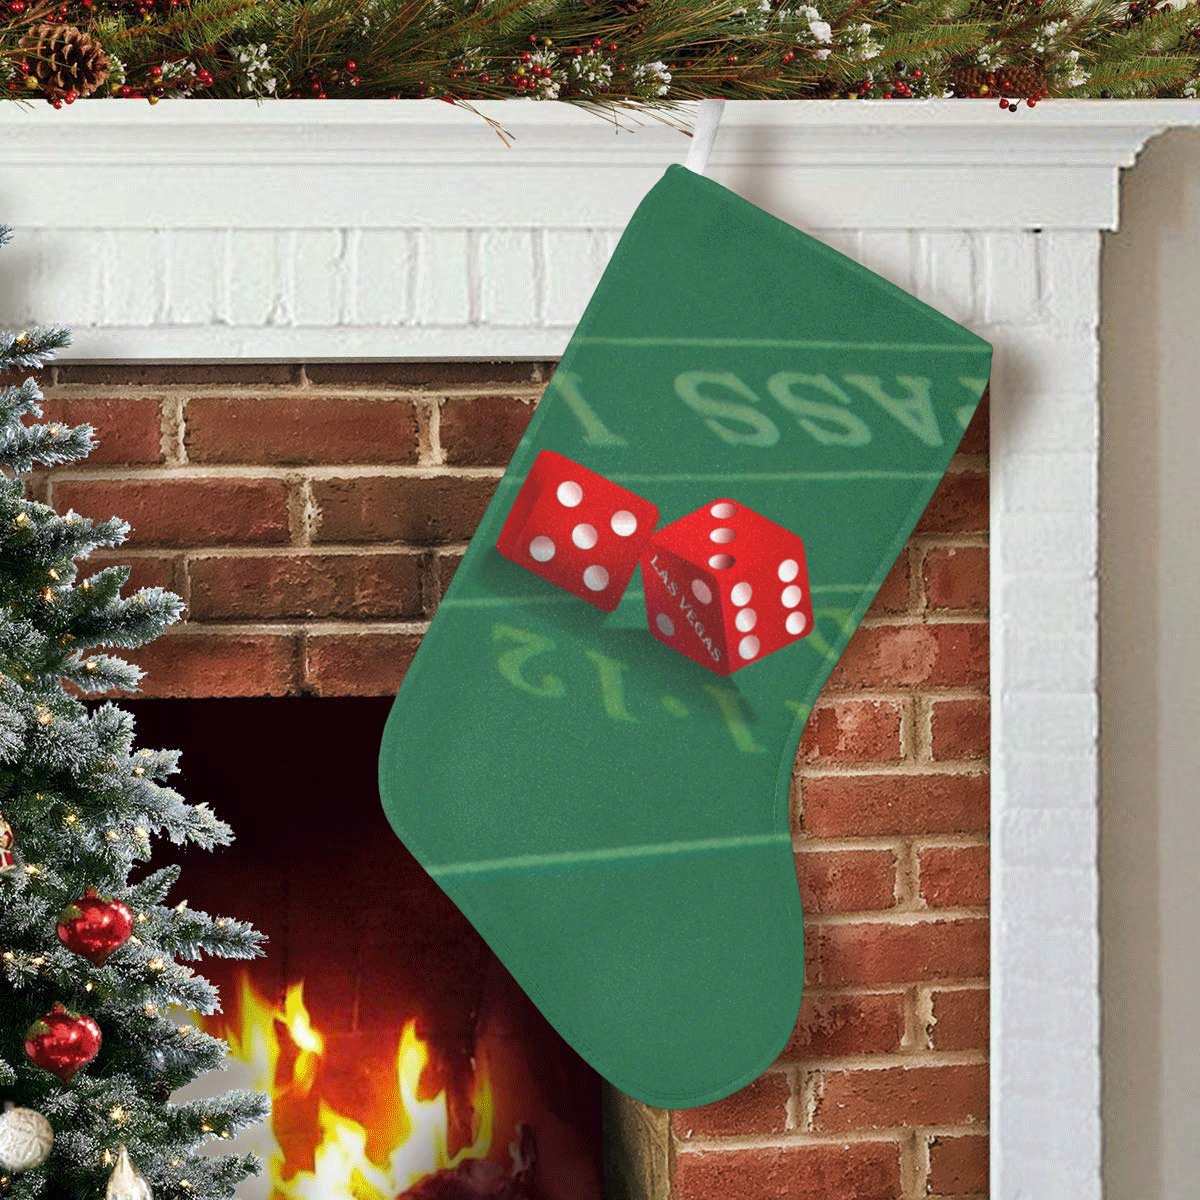 Las Vegas Dice on Craps Table Christmas Stocking (Without Folded Top)